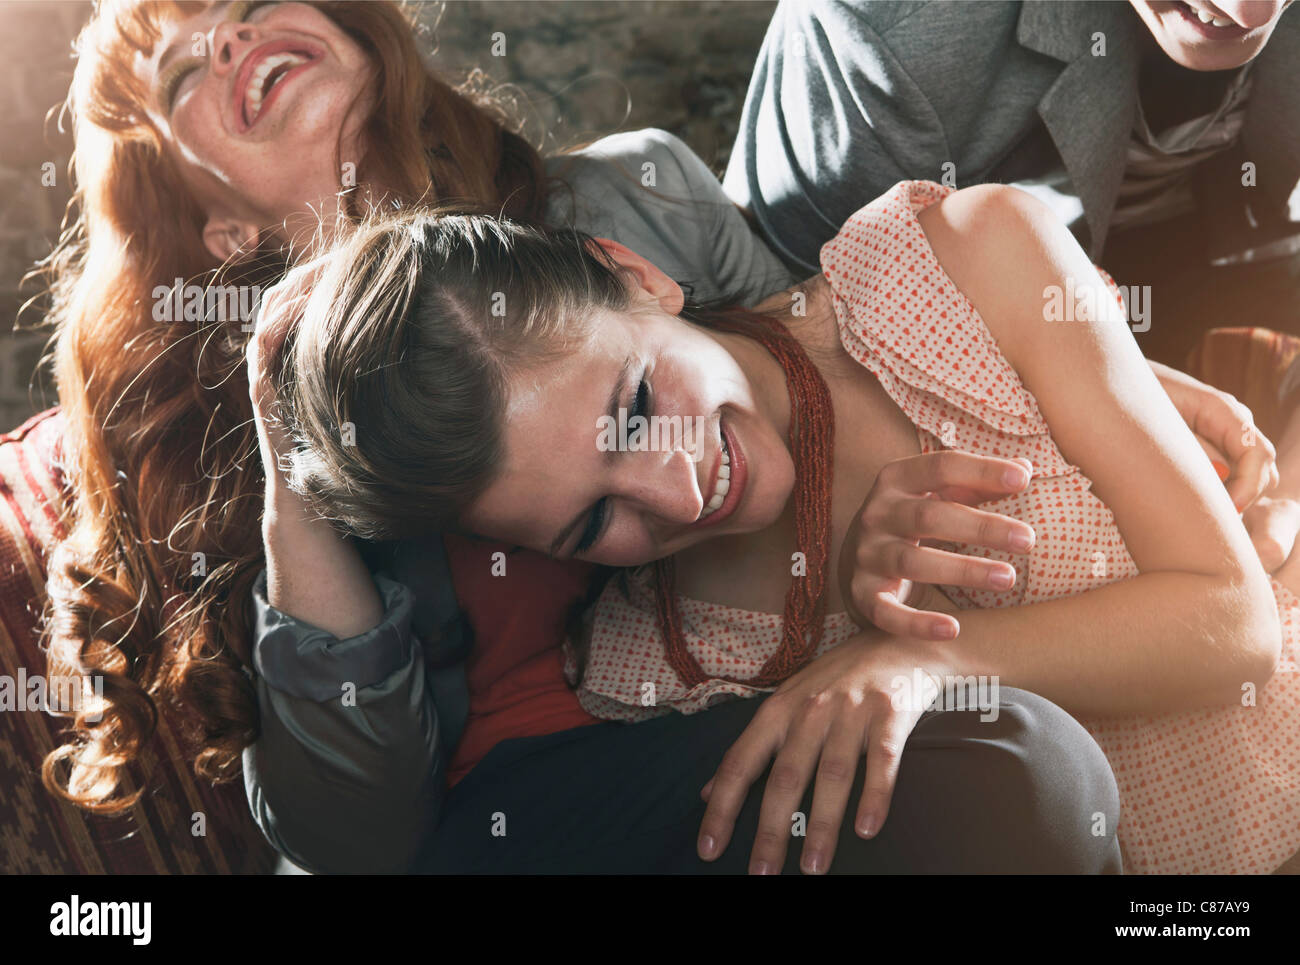 Germany, Berlin, Close up of friends having fun at party, smiling Stock Photo